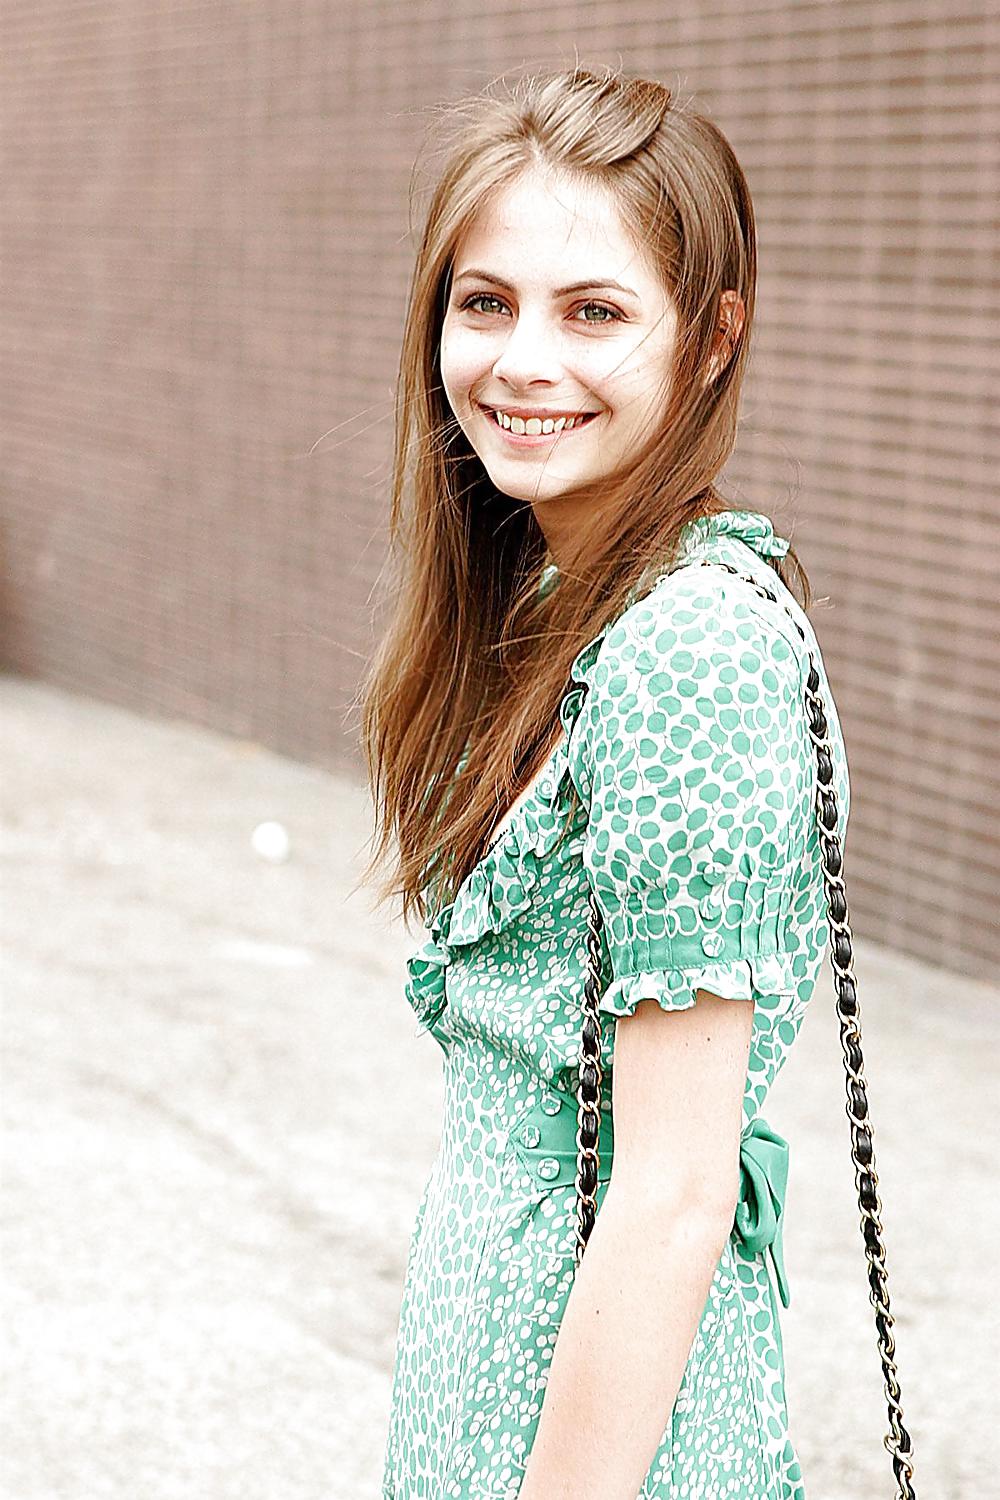 Willa holland (hotest young celebrity) for fan :) 
 #15420325